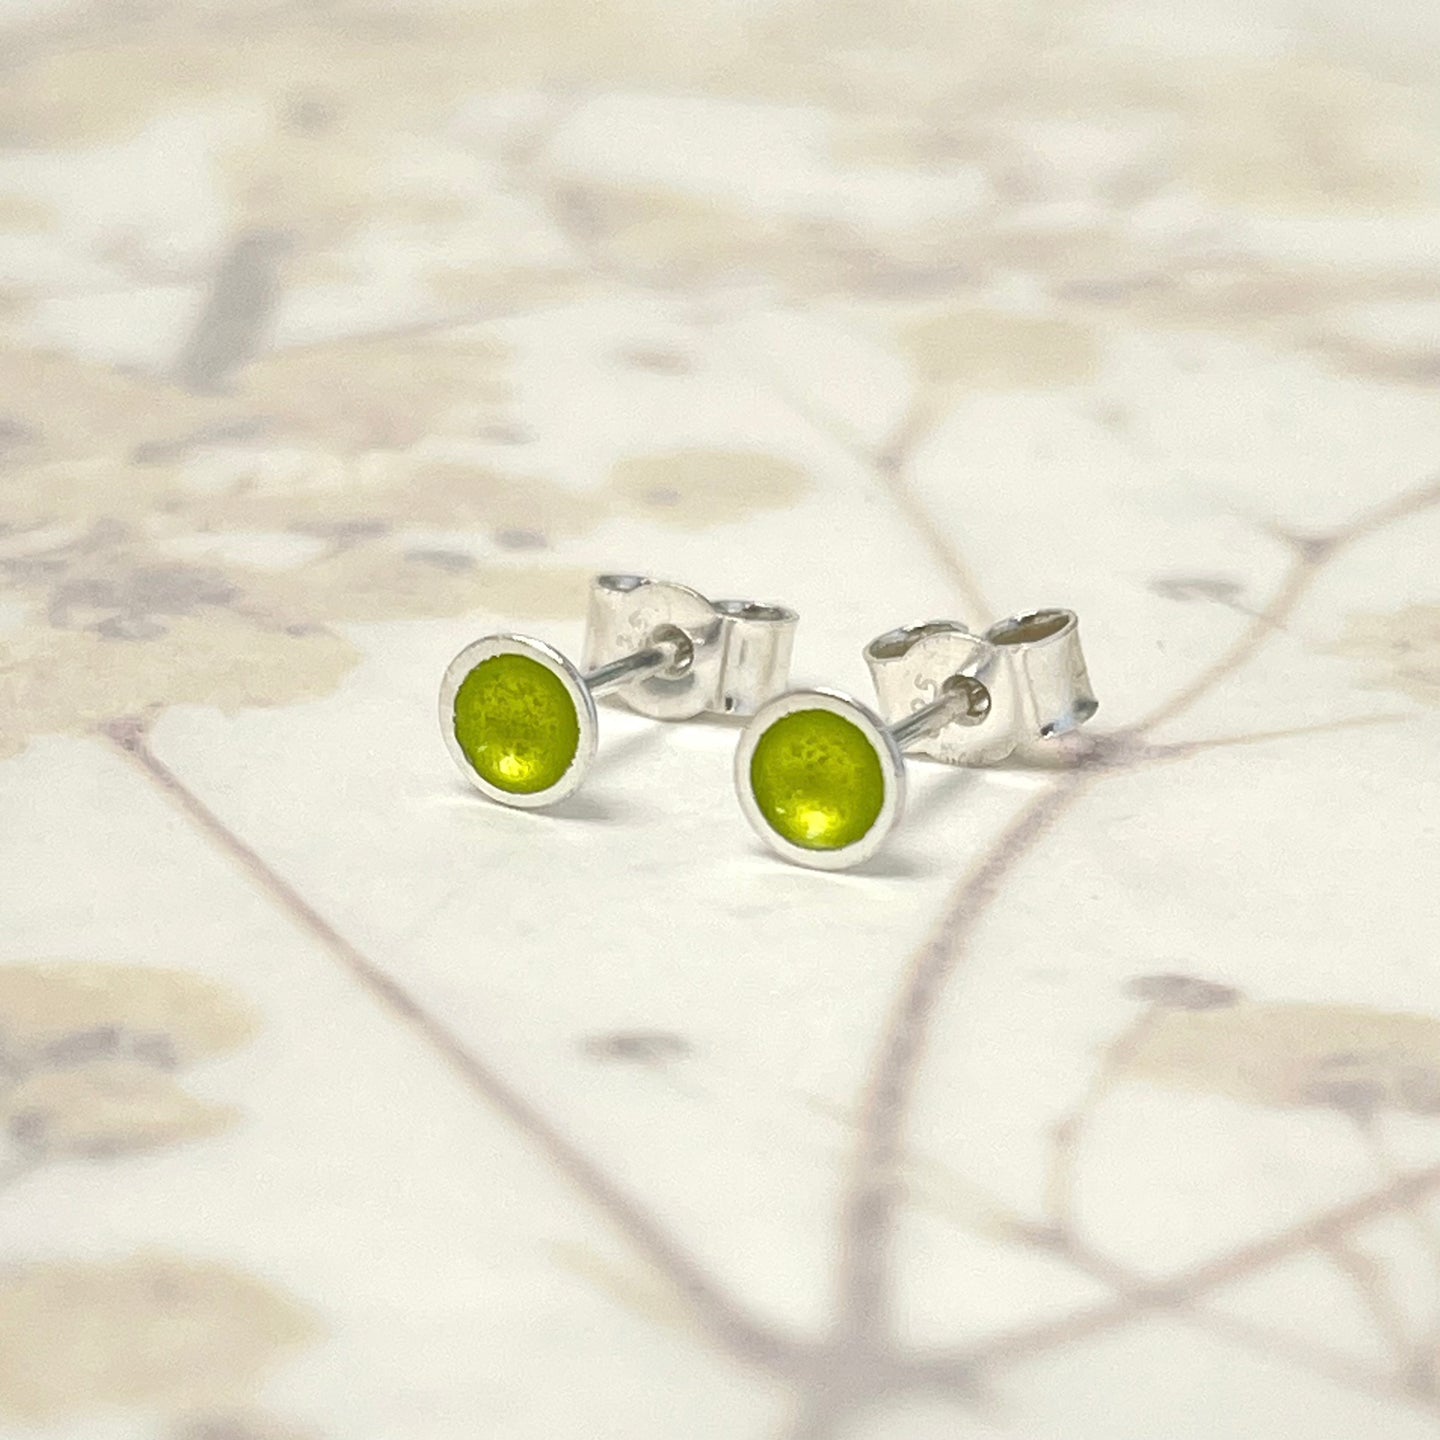 Silver and lime green enamel dainty studs